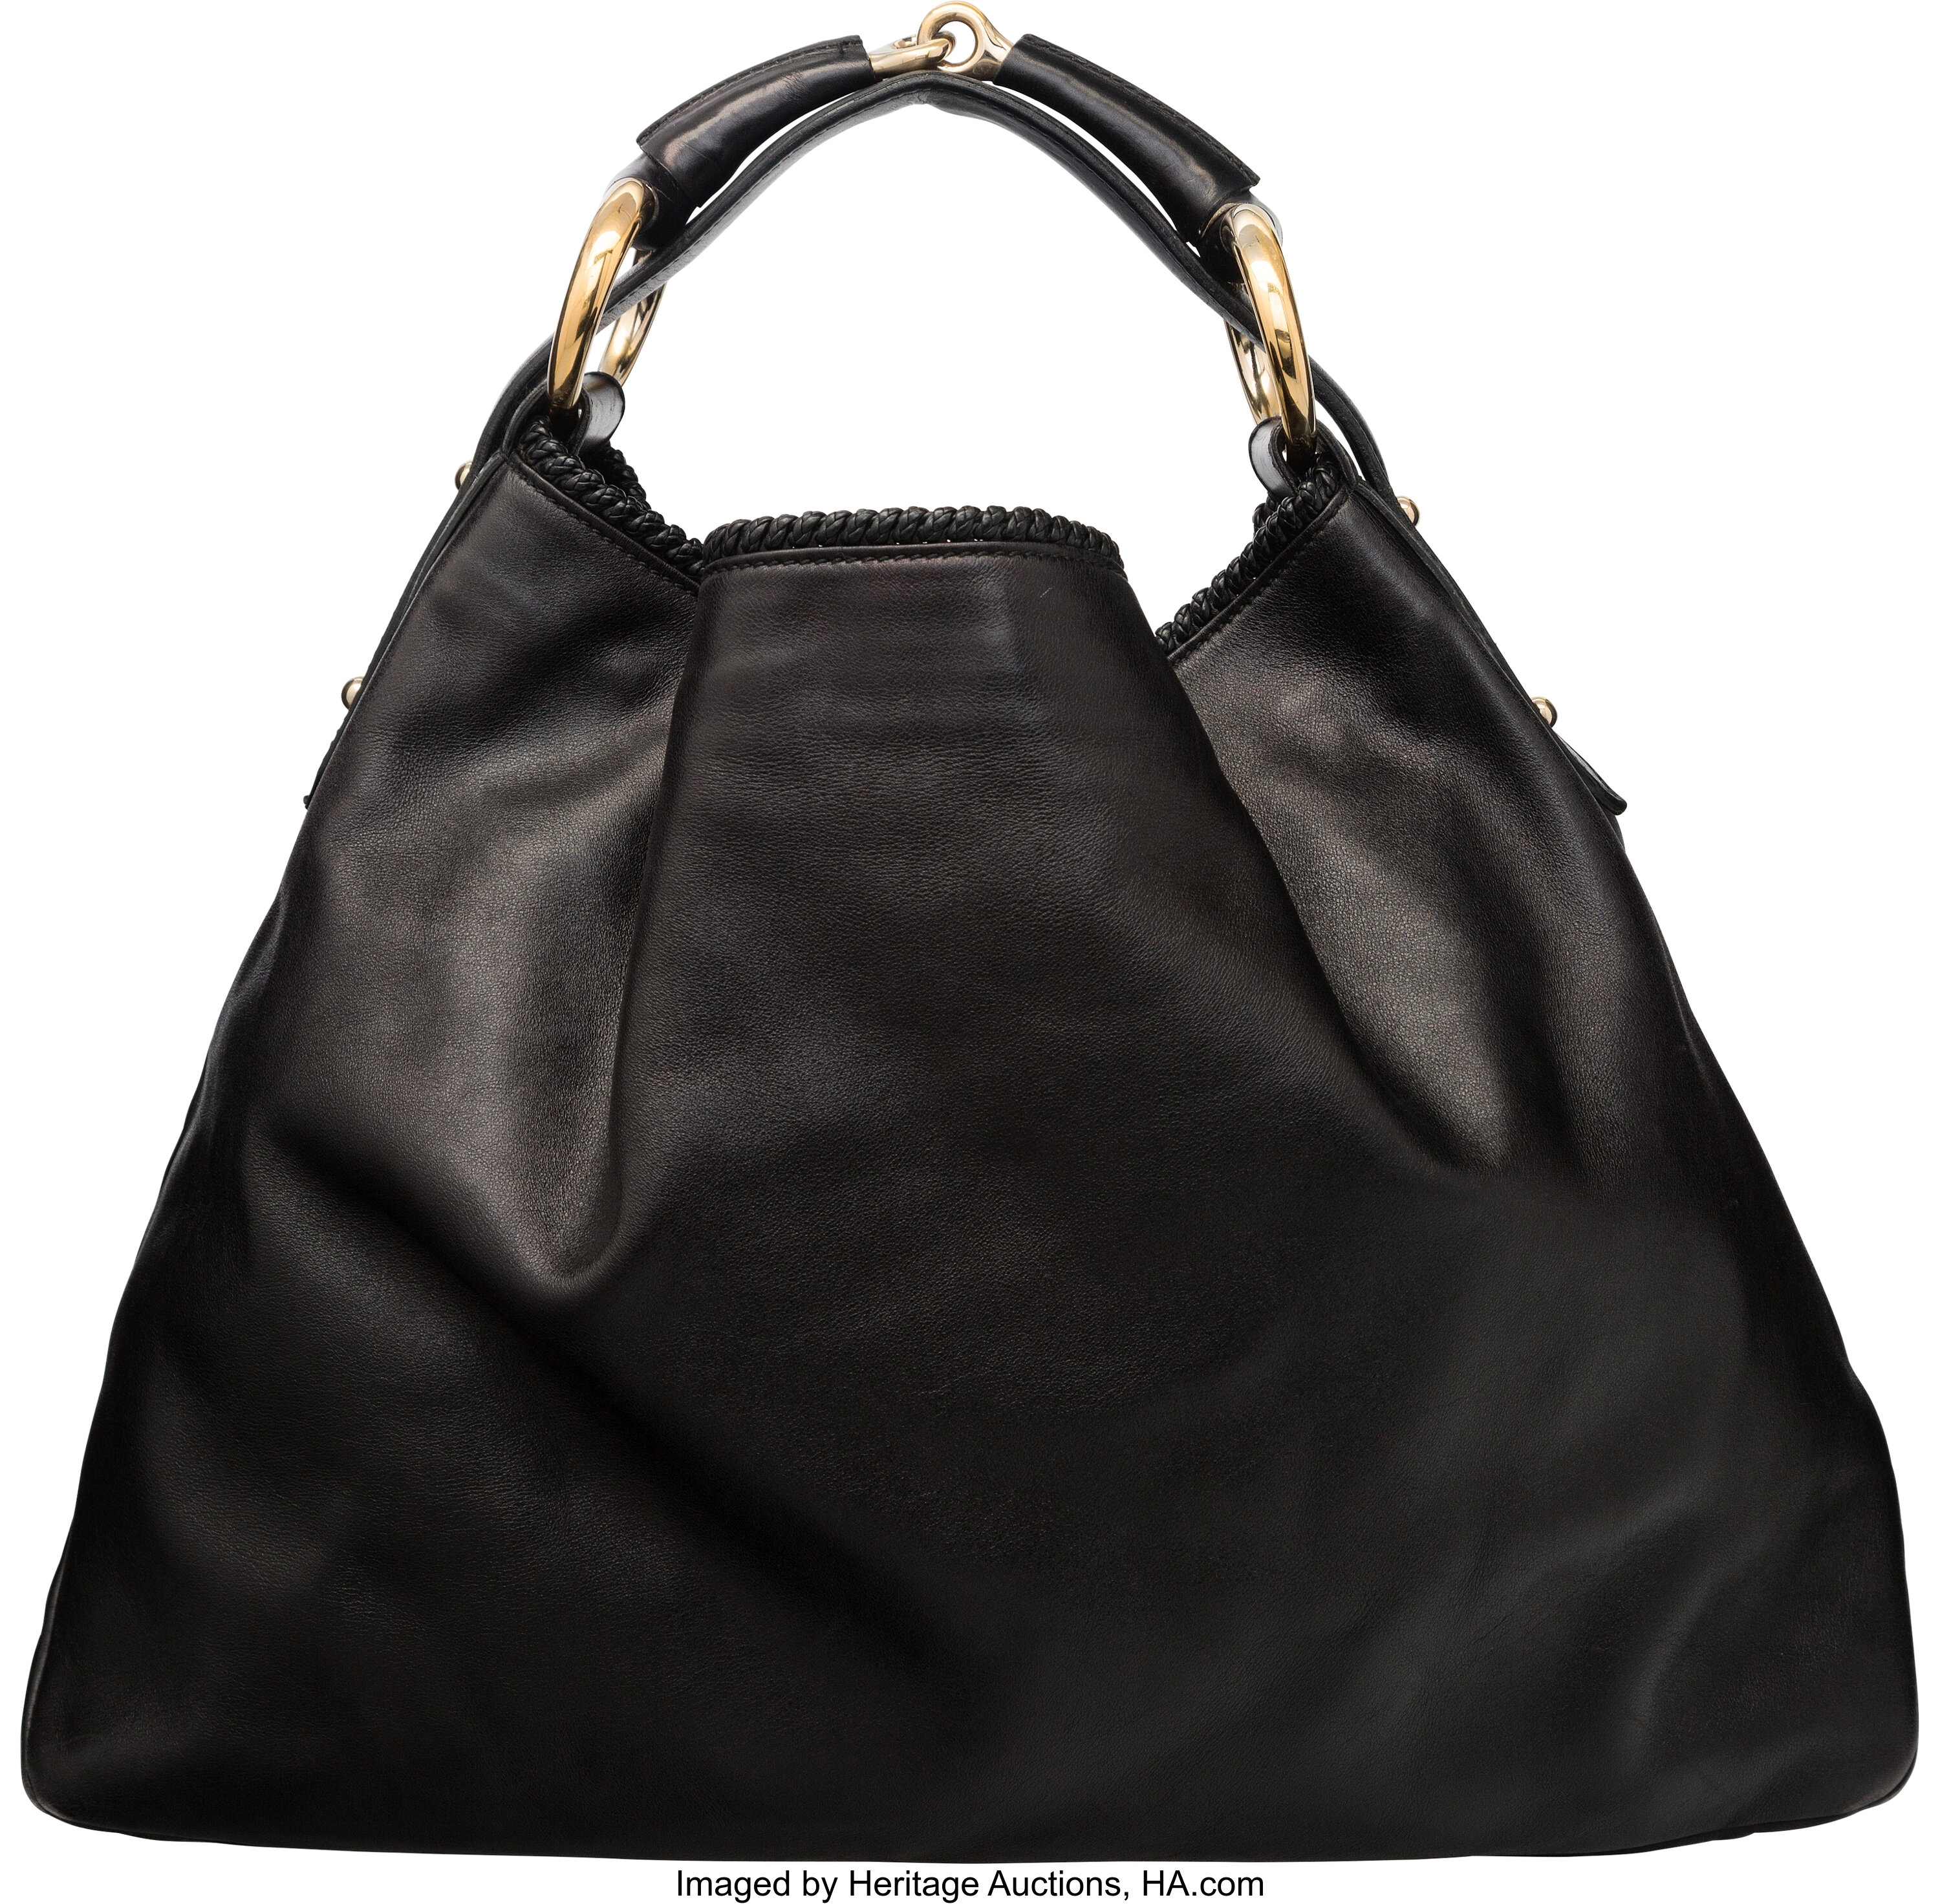 AUTHENTIC GUCCI Black Embossed Horsebit Leather Hobo Handbag Large Glam -  Los Angeles Dismantler - Used Porsche Parts for 911, Boxster, and Cayman